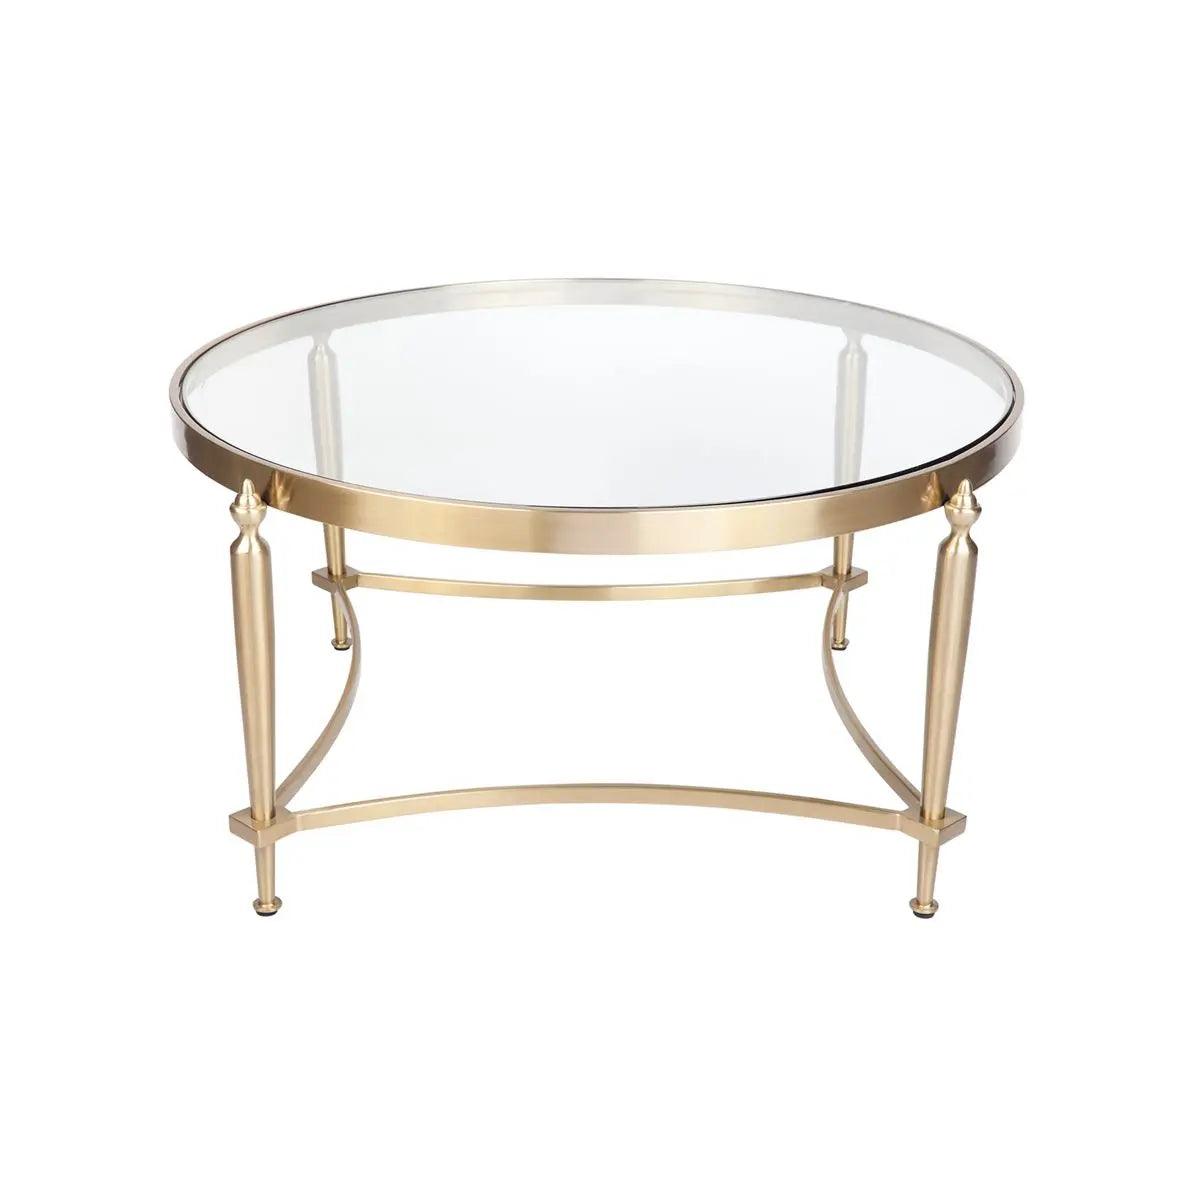 Jak Glass Coffee Table - Gold - Coffee Table322549320294115510 1